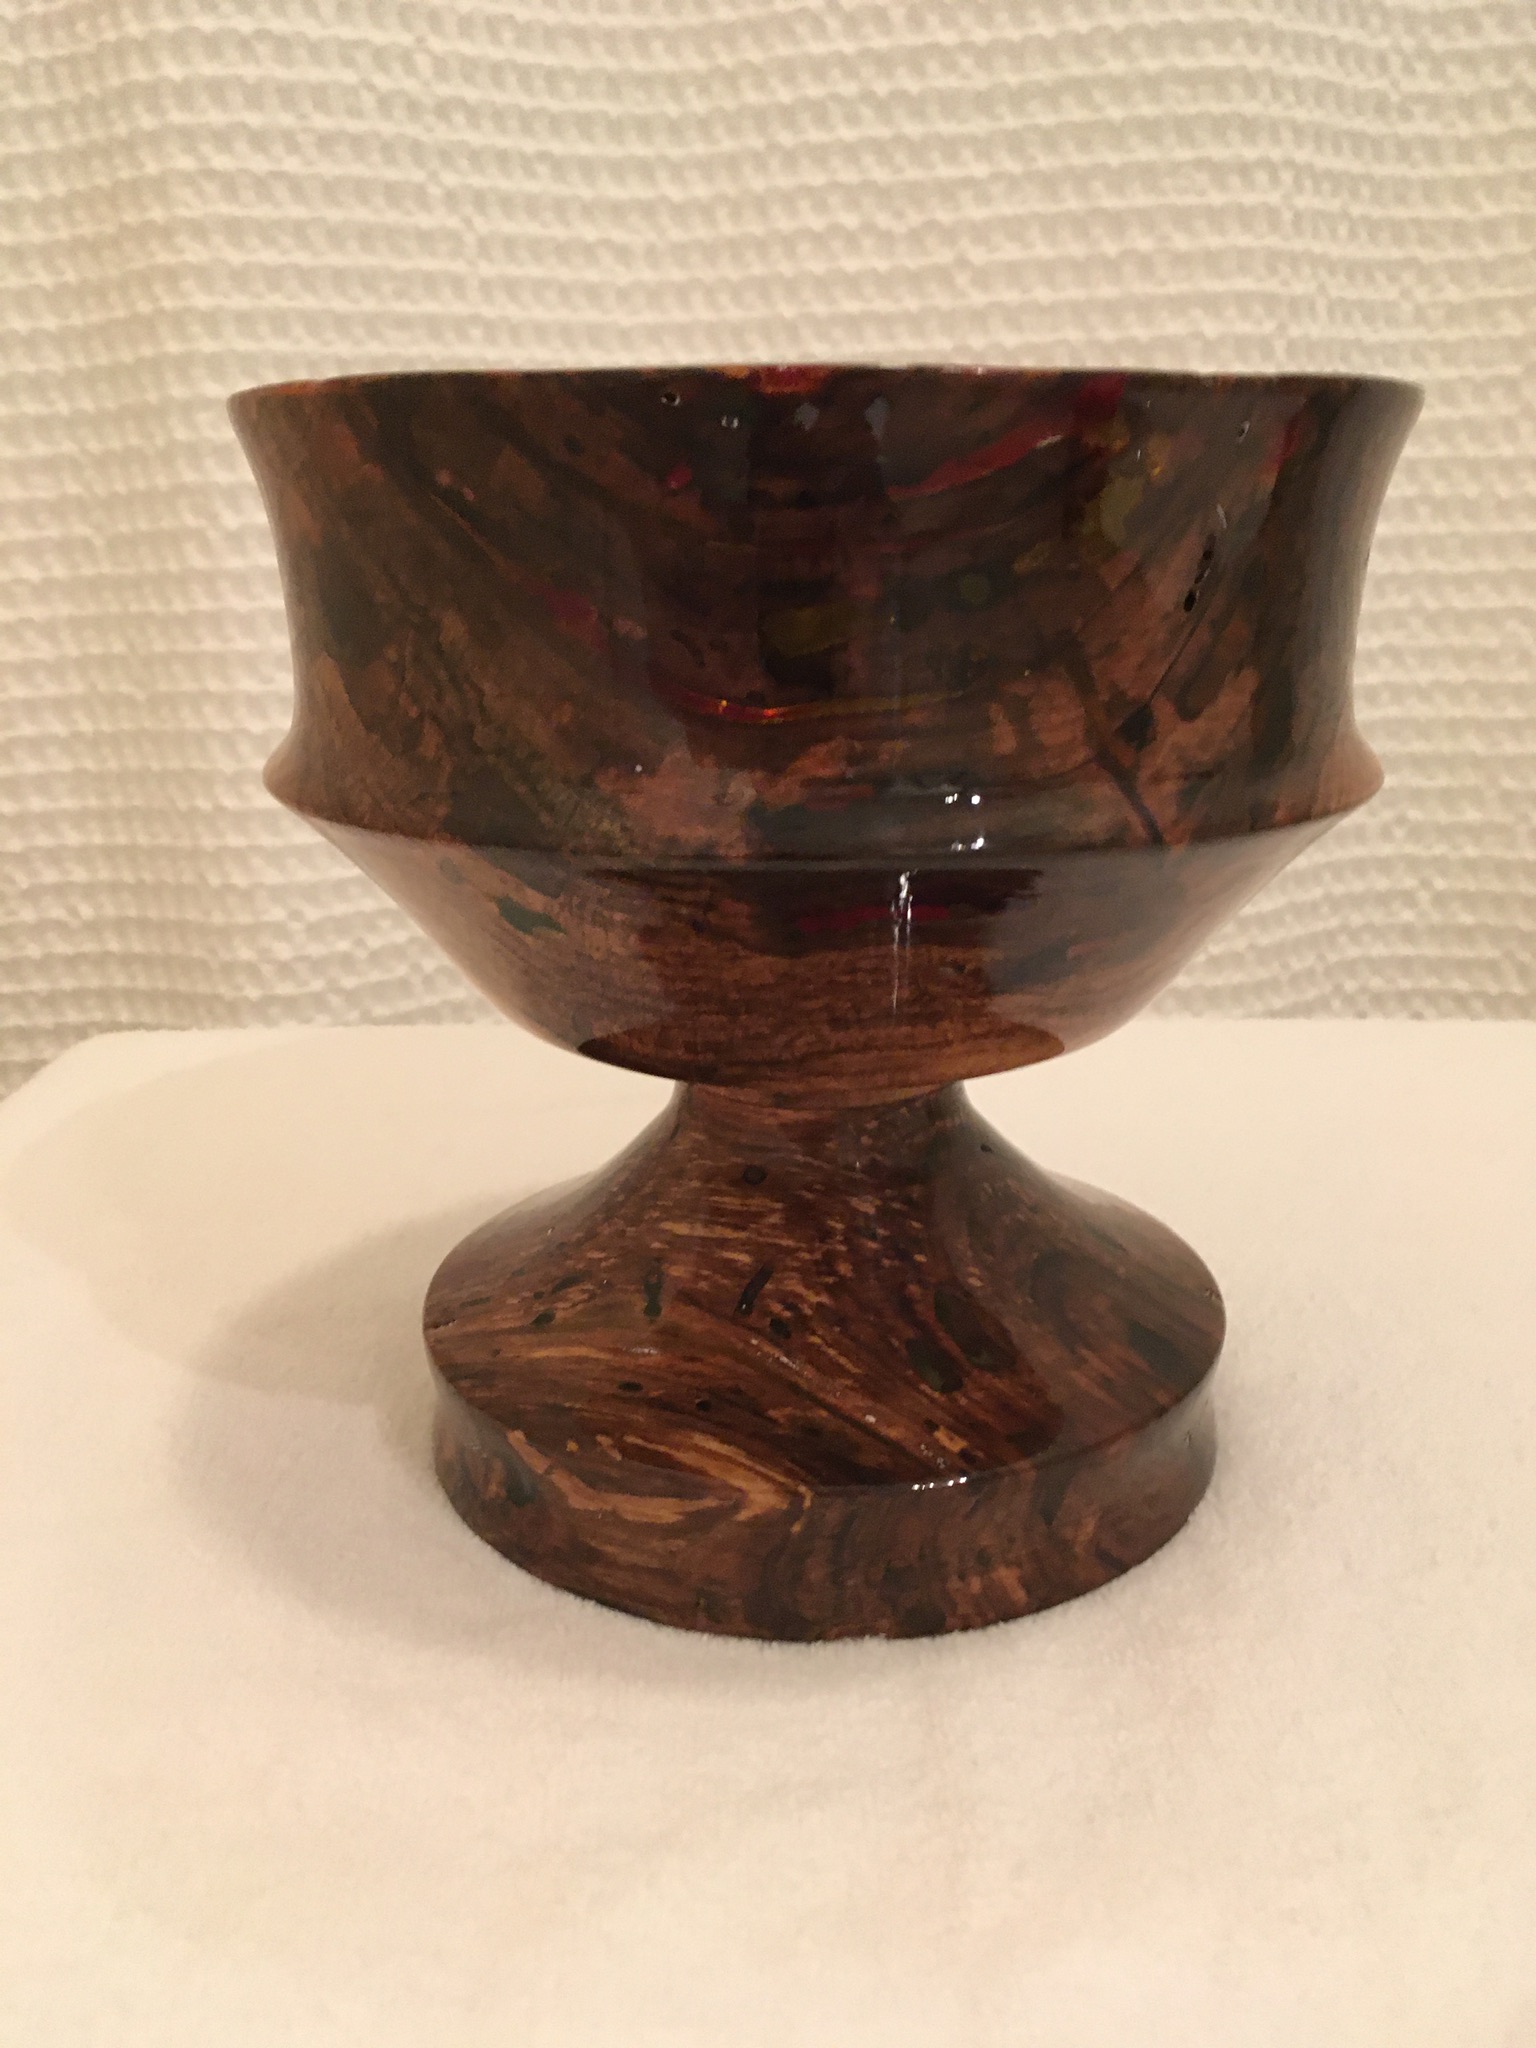 English walnut with worm holes filled with dyed epoxy and turned